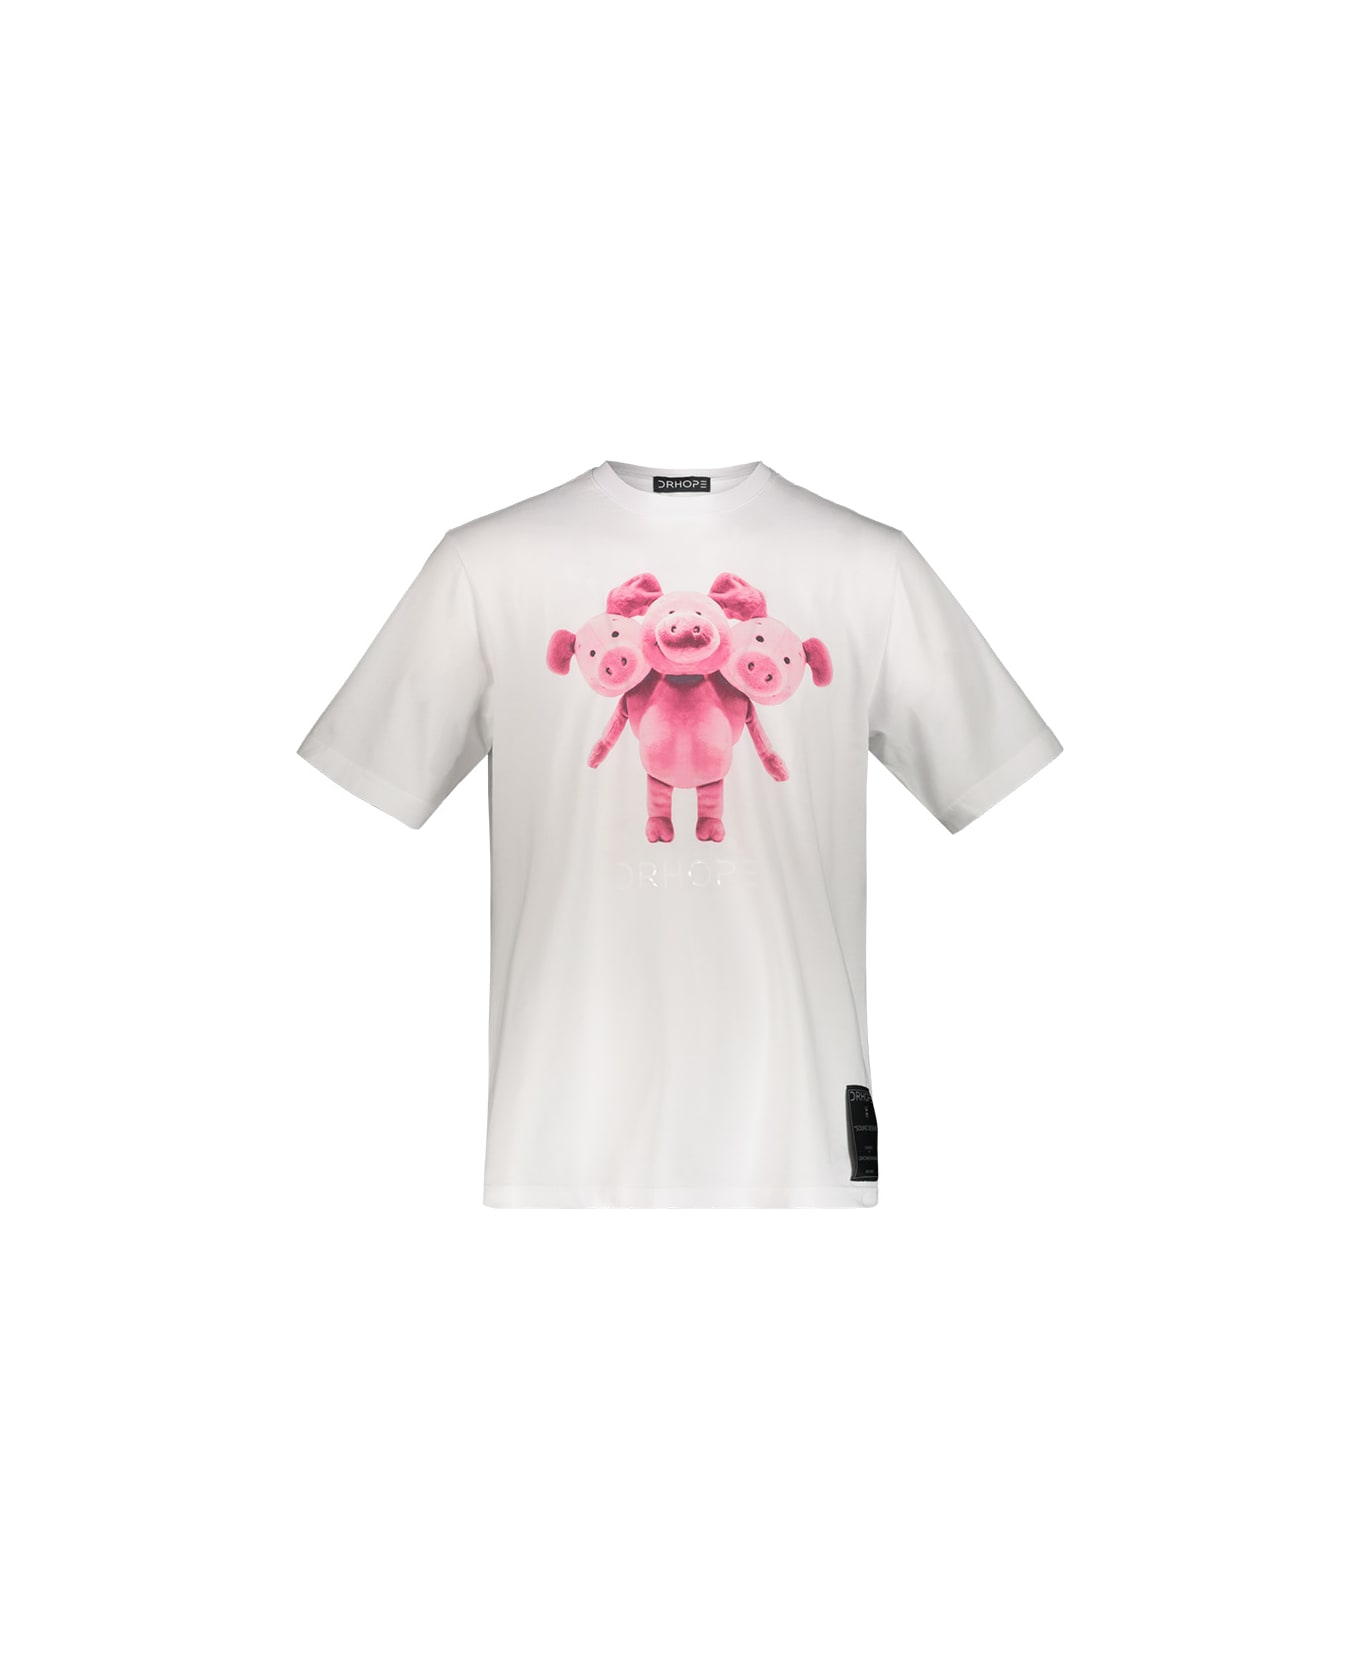 Drhope White T-shirt With Pig Print - White